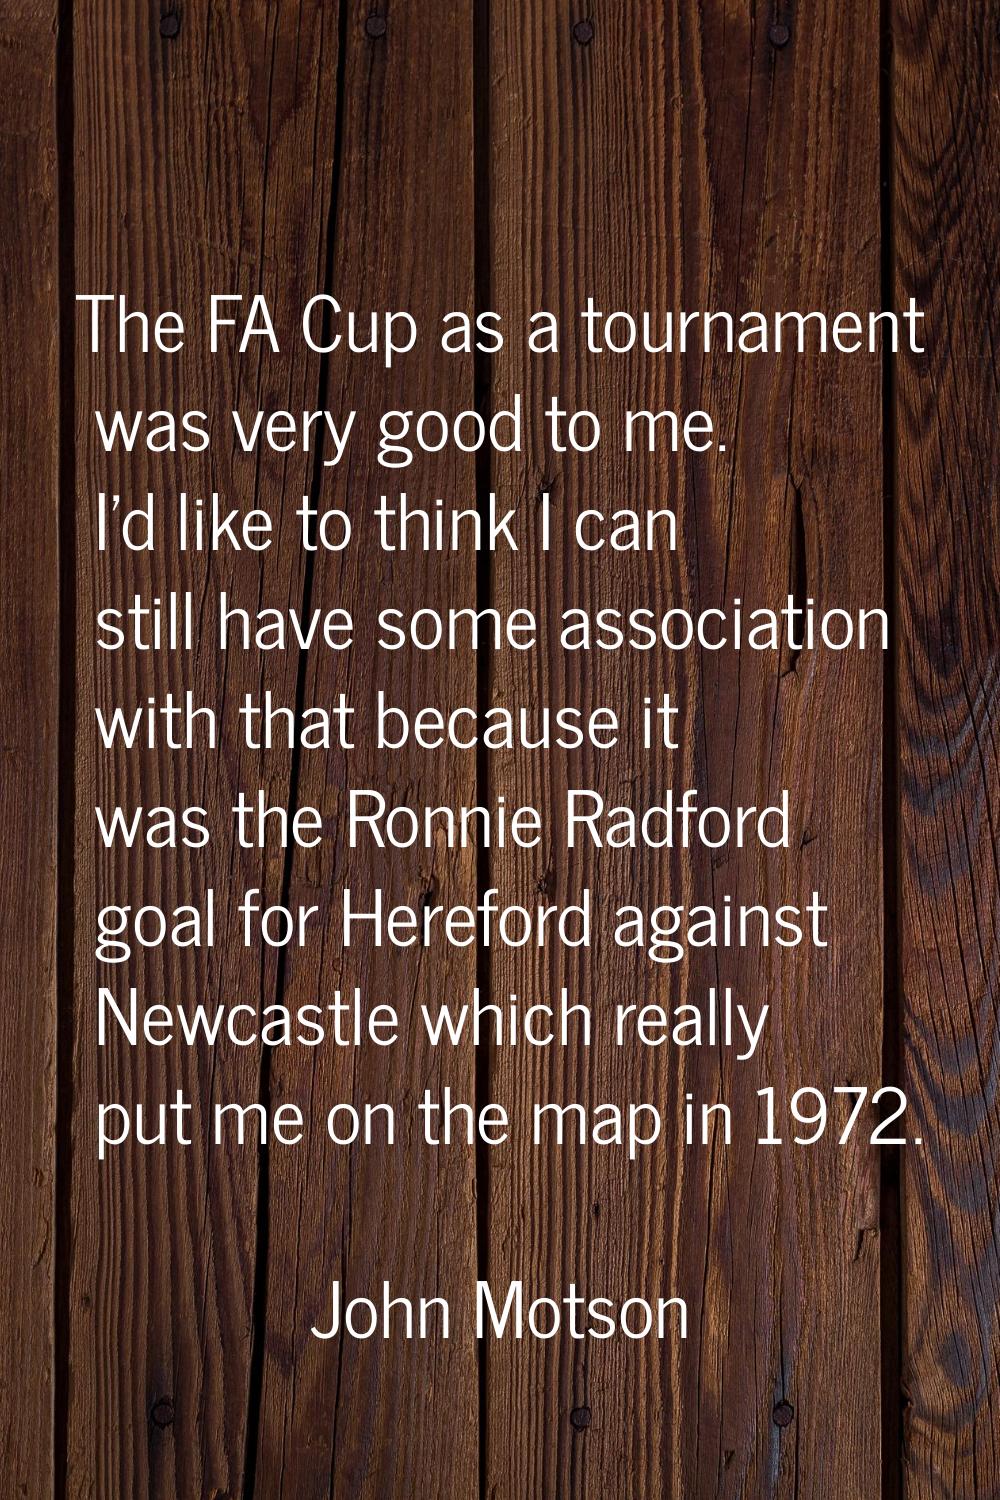 The FA Cup as a tournament was very good to me. I'd like to think I can still have some association